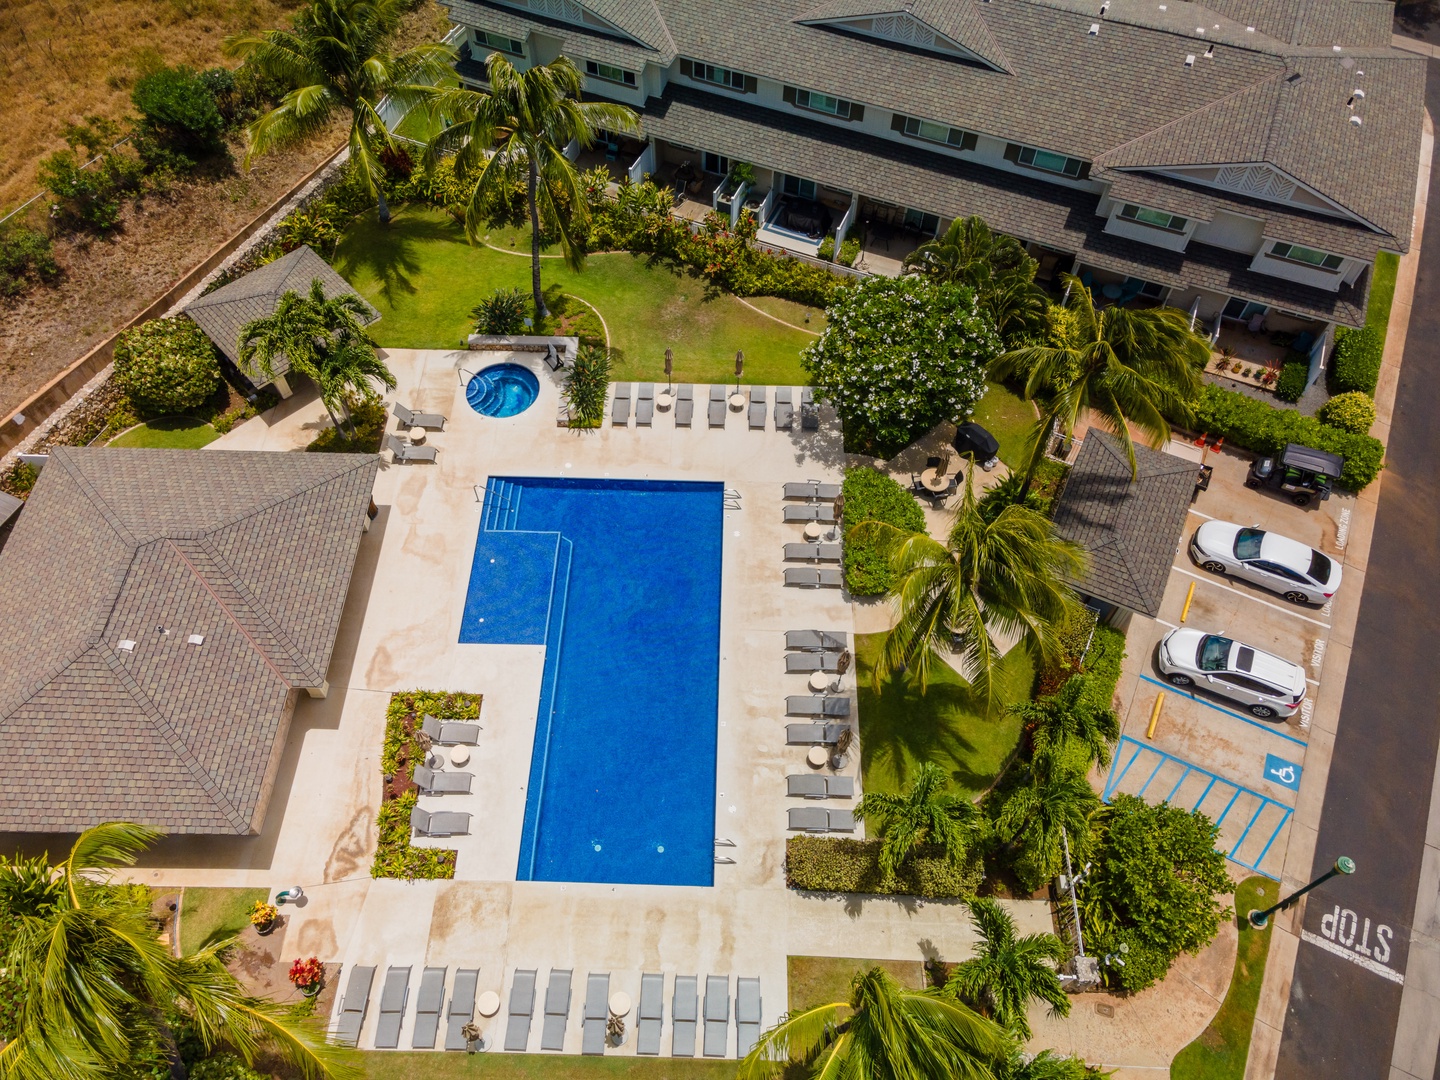 Kapolei Vacation Rentals, Hillside Villas 1496-2 - The tropical surroundings of the pool.